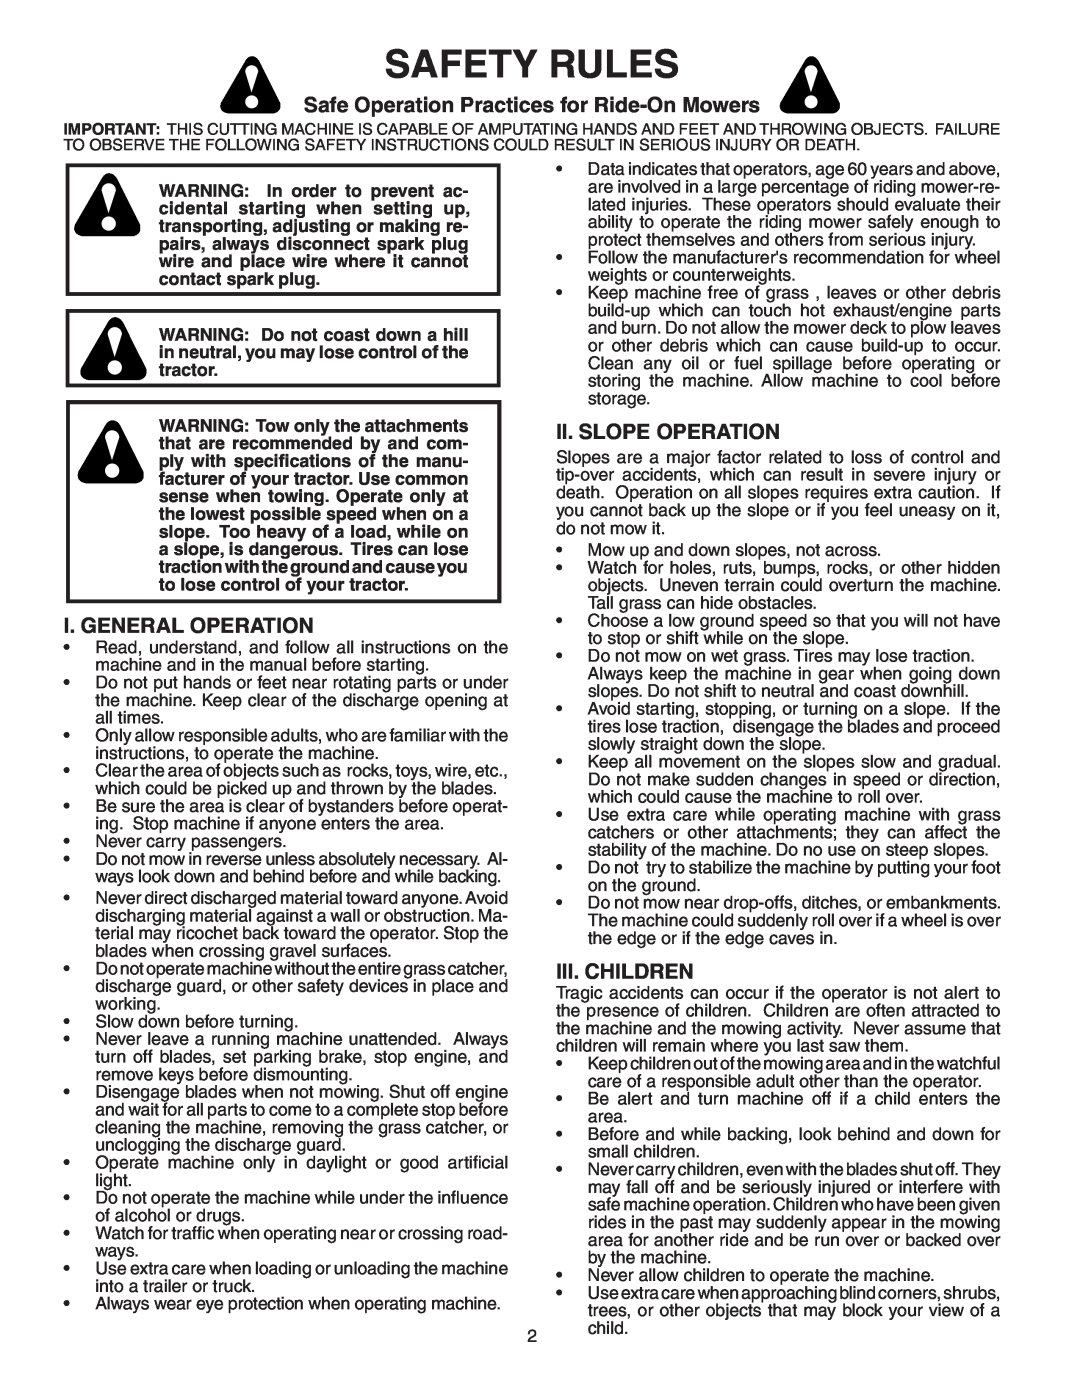 Poulan 960 72 00-10 Safety Rules, Safe Operation Practices for Ride-OnMowers, I. General Operation, Ii. Slope Operation 